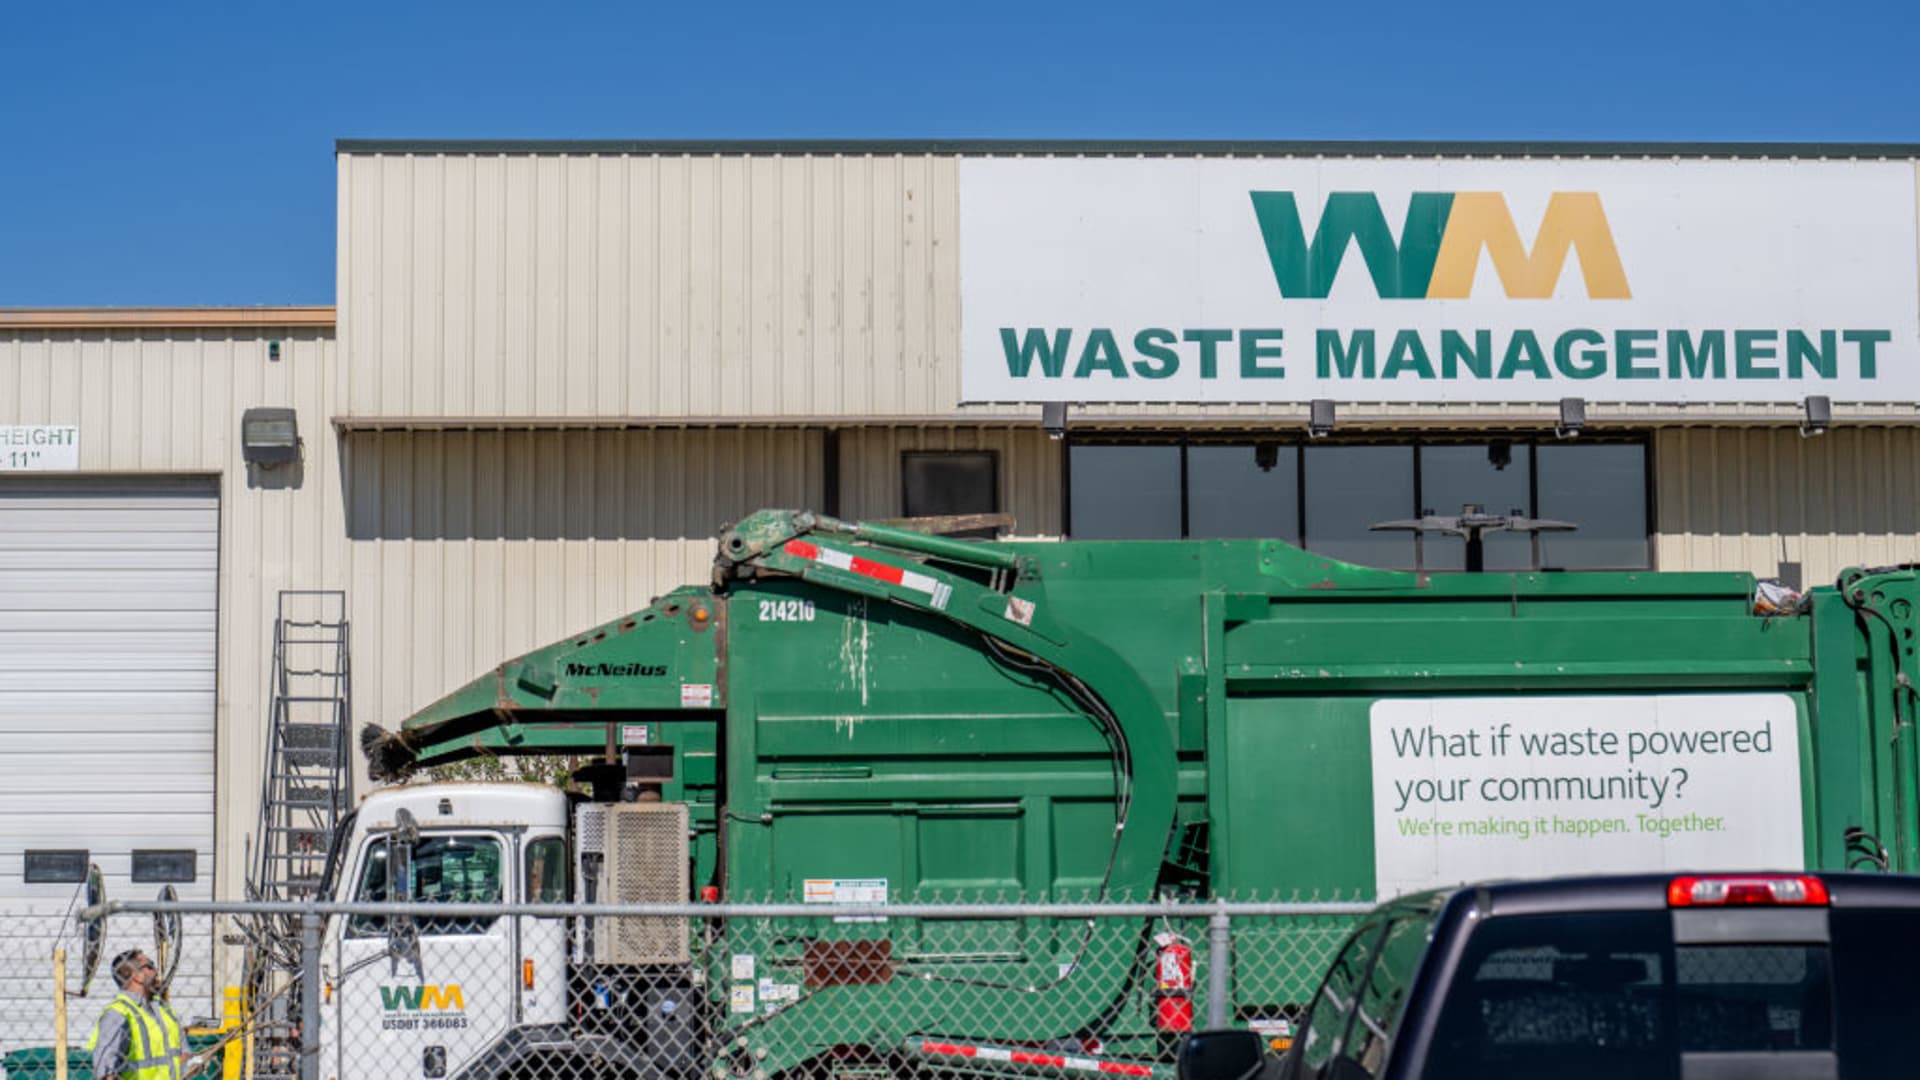 Waste Management to acquire Stericycle in a $7.2 billion deal